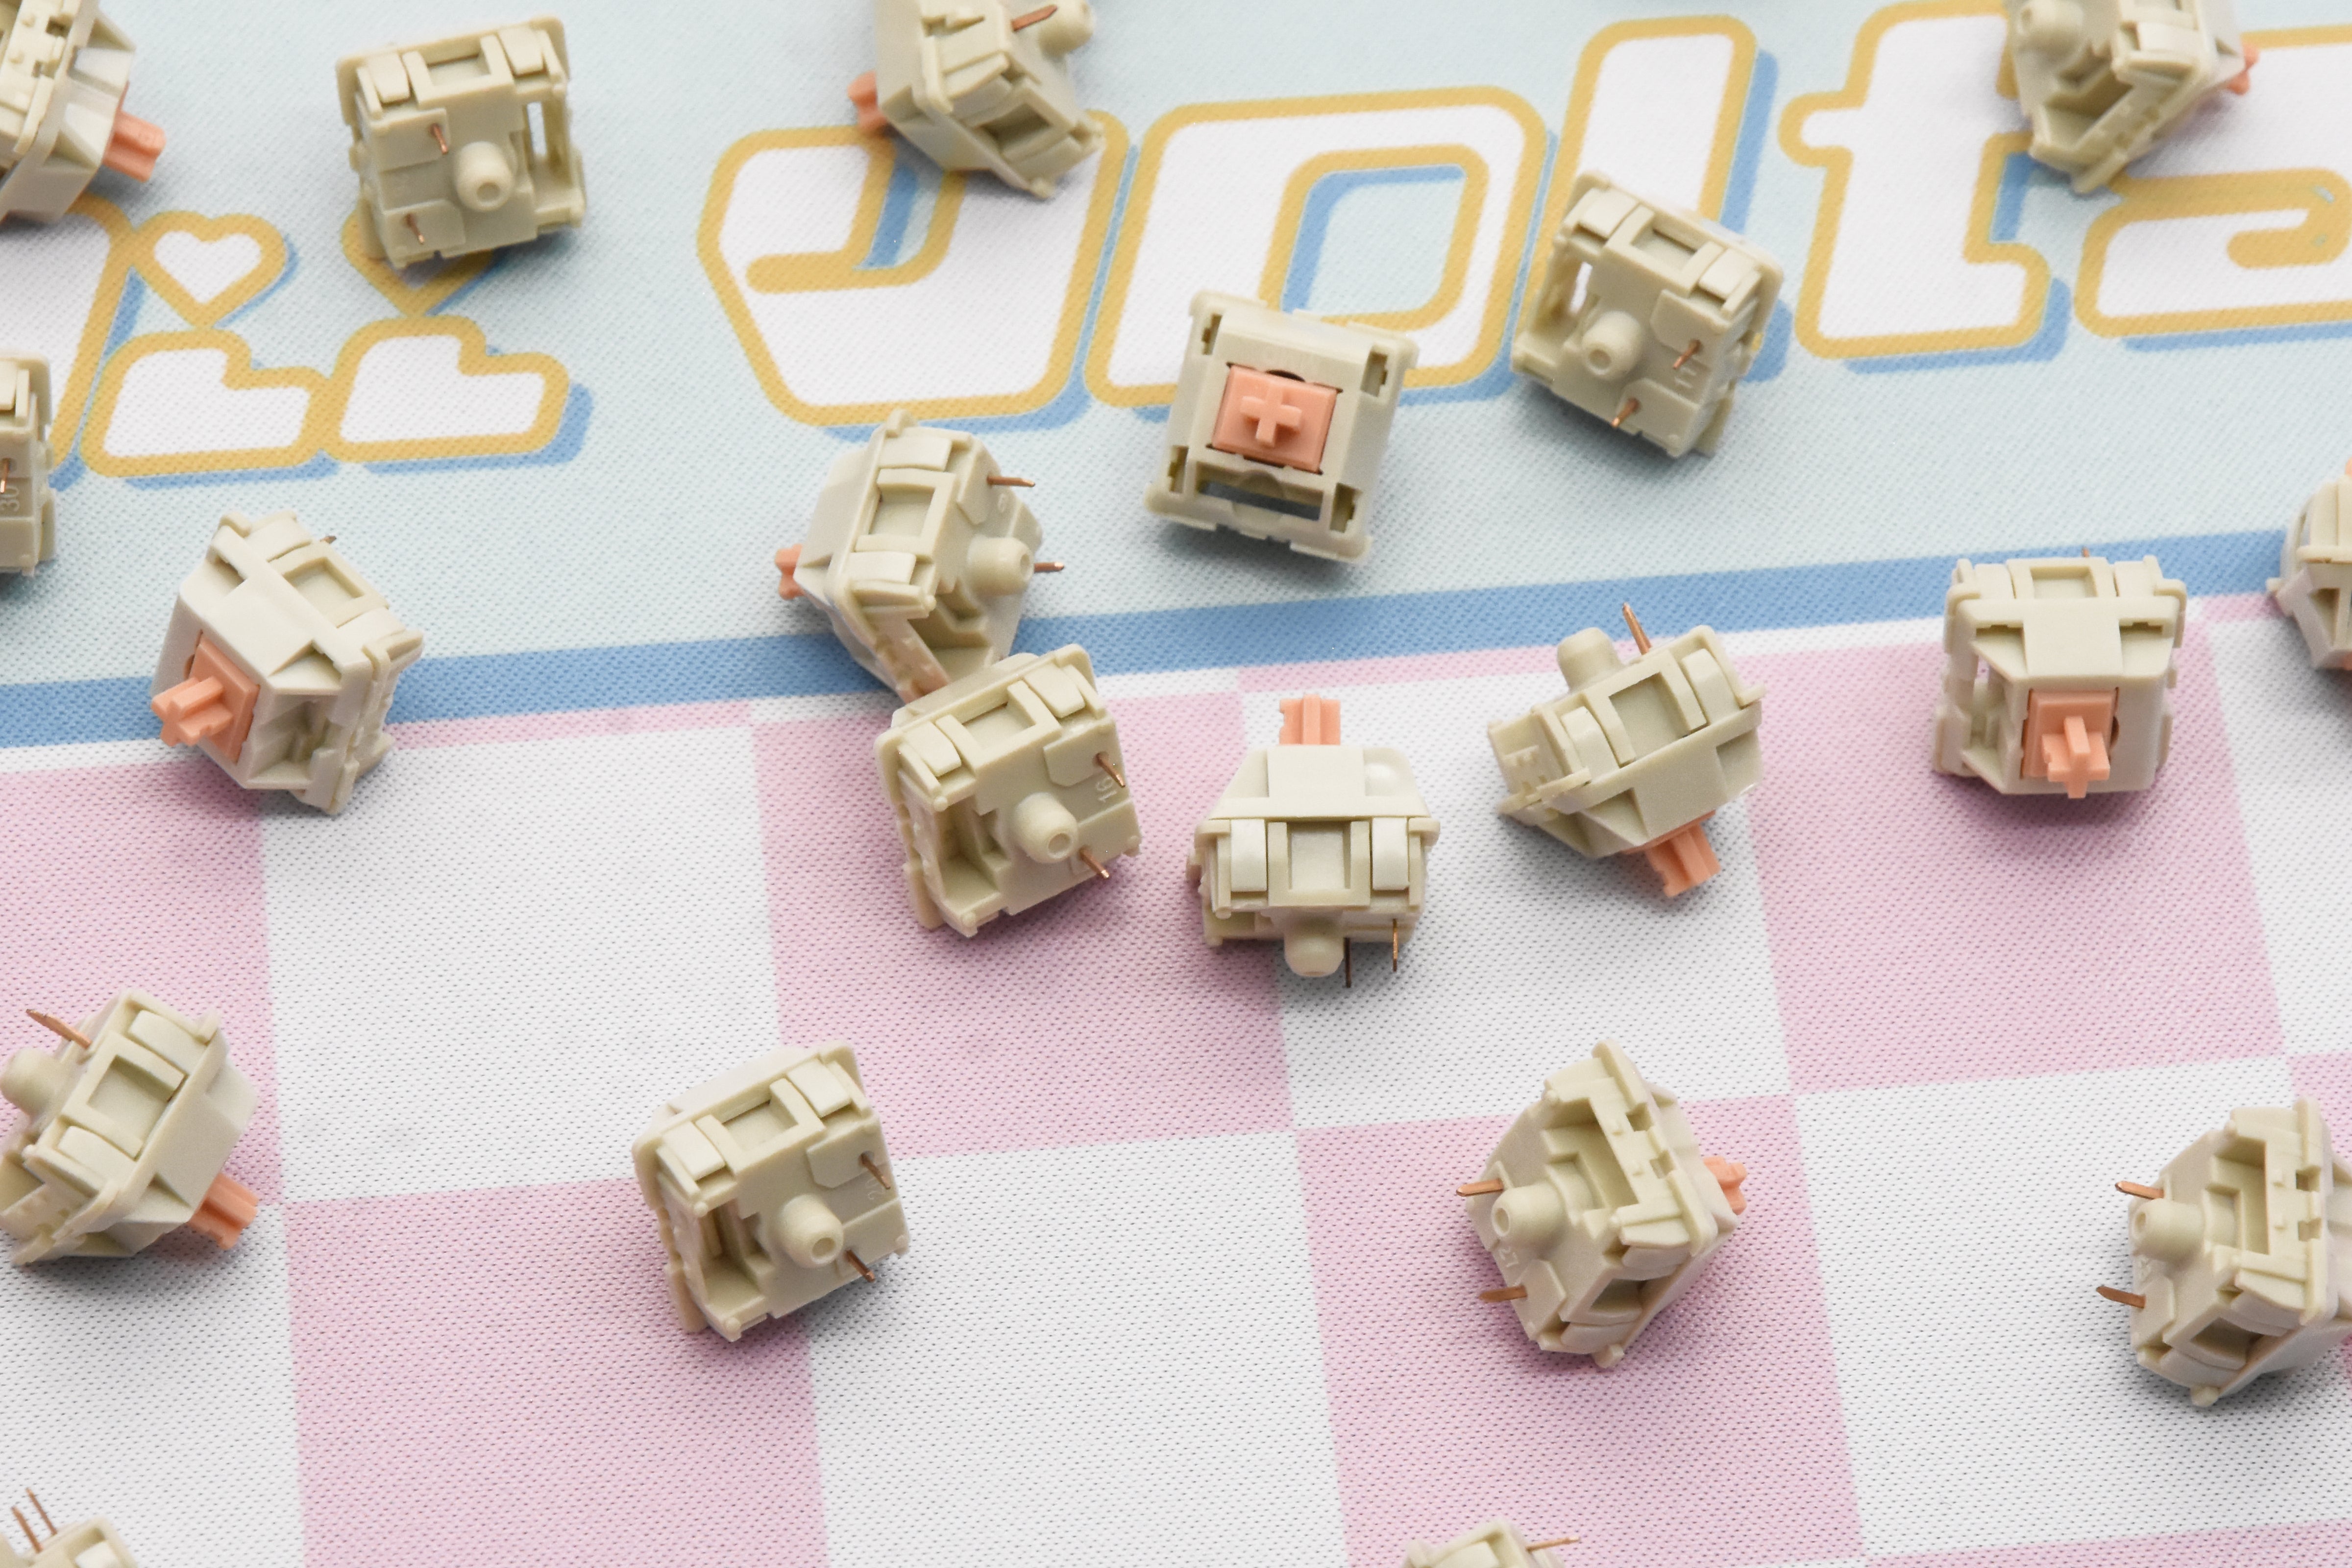 MMD HOLY PANDA V2 TACTILE SWITCH FACTORY LUBED EDITION (10PCS)